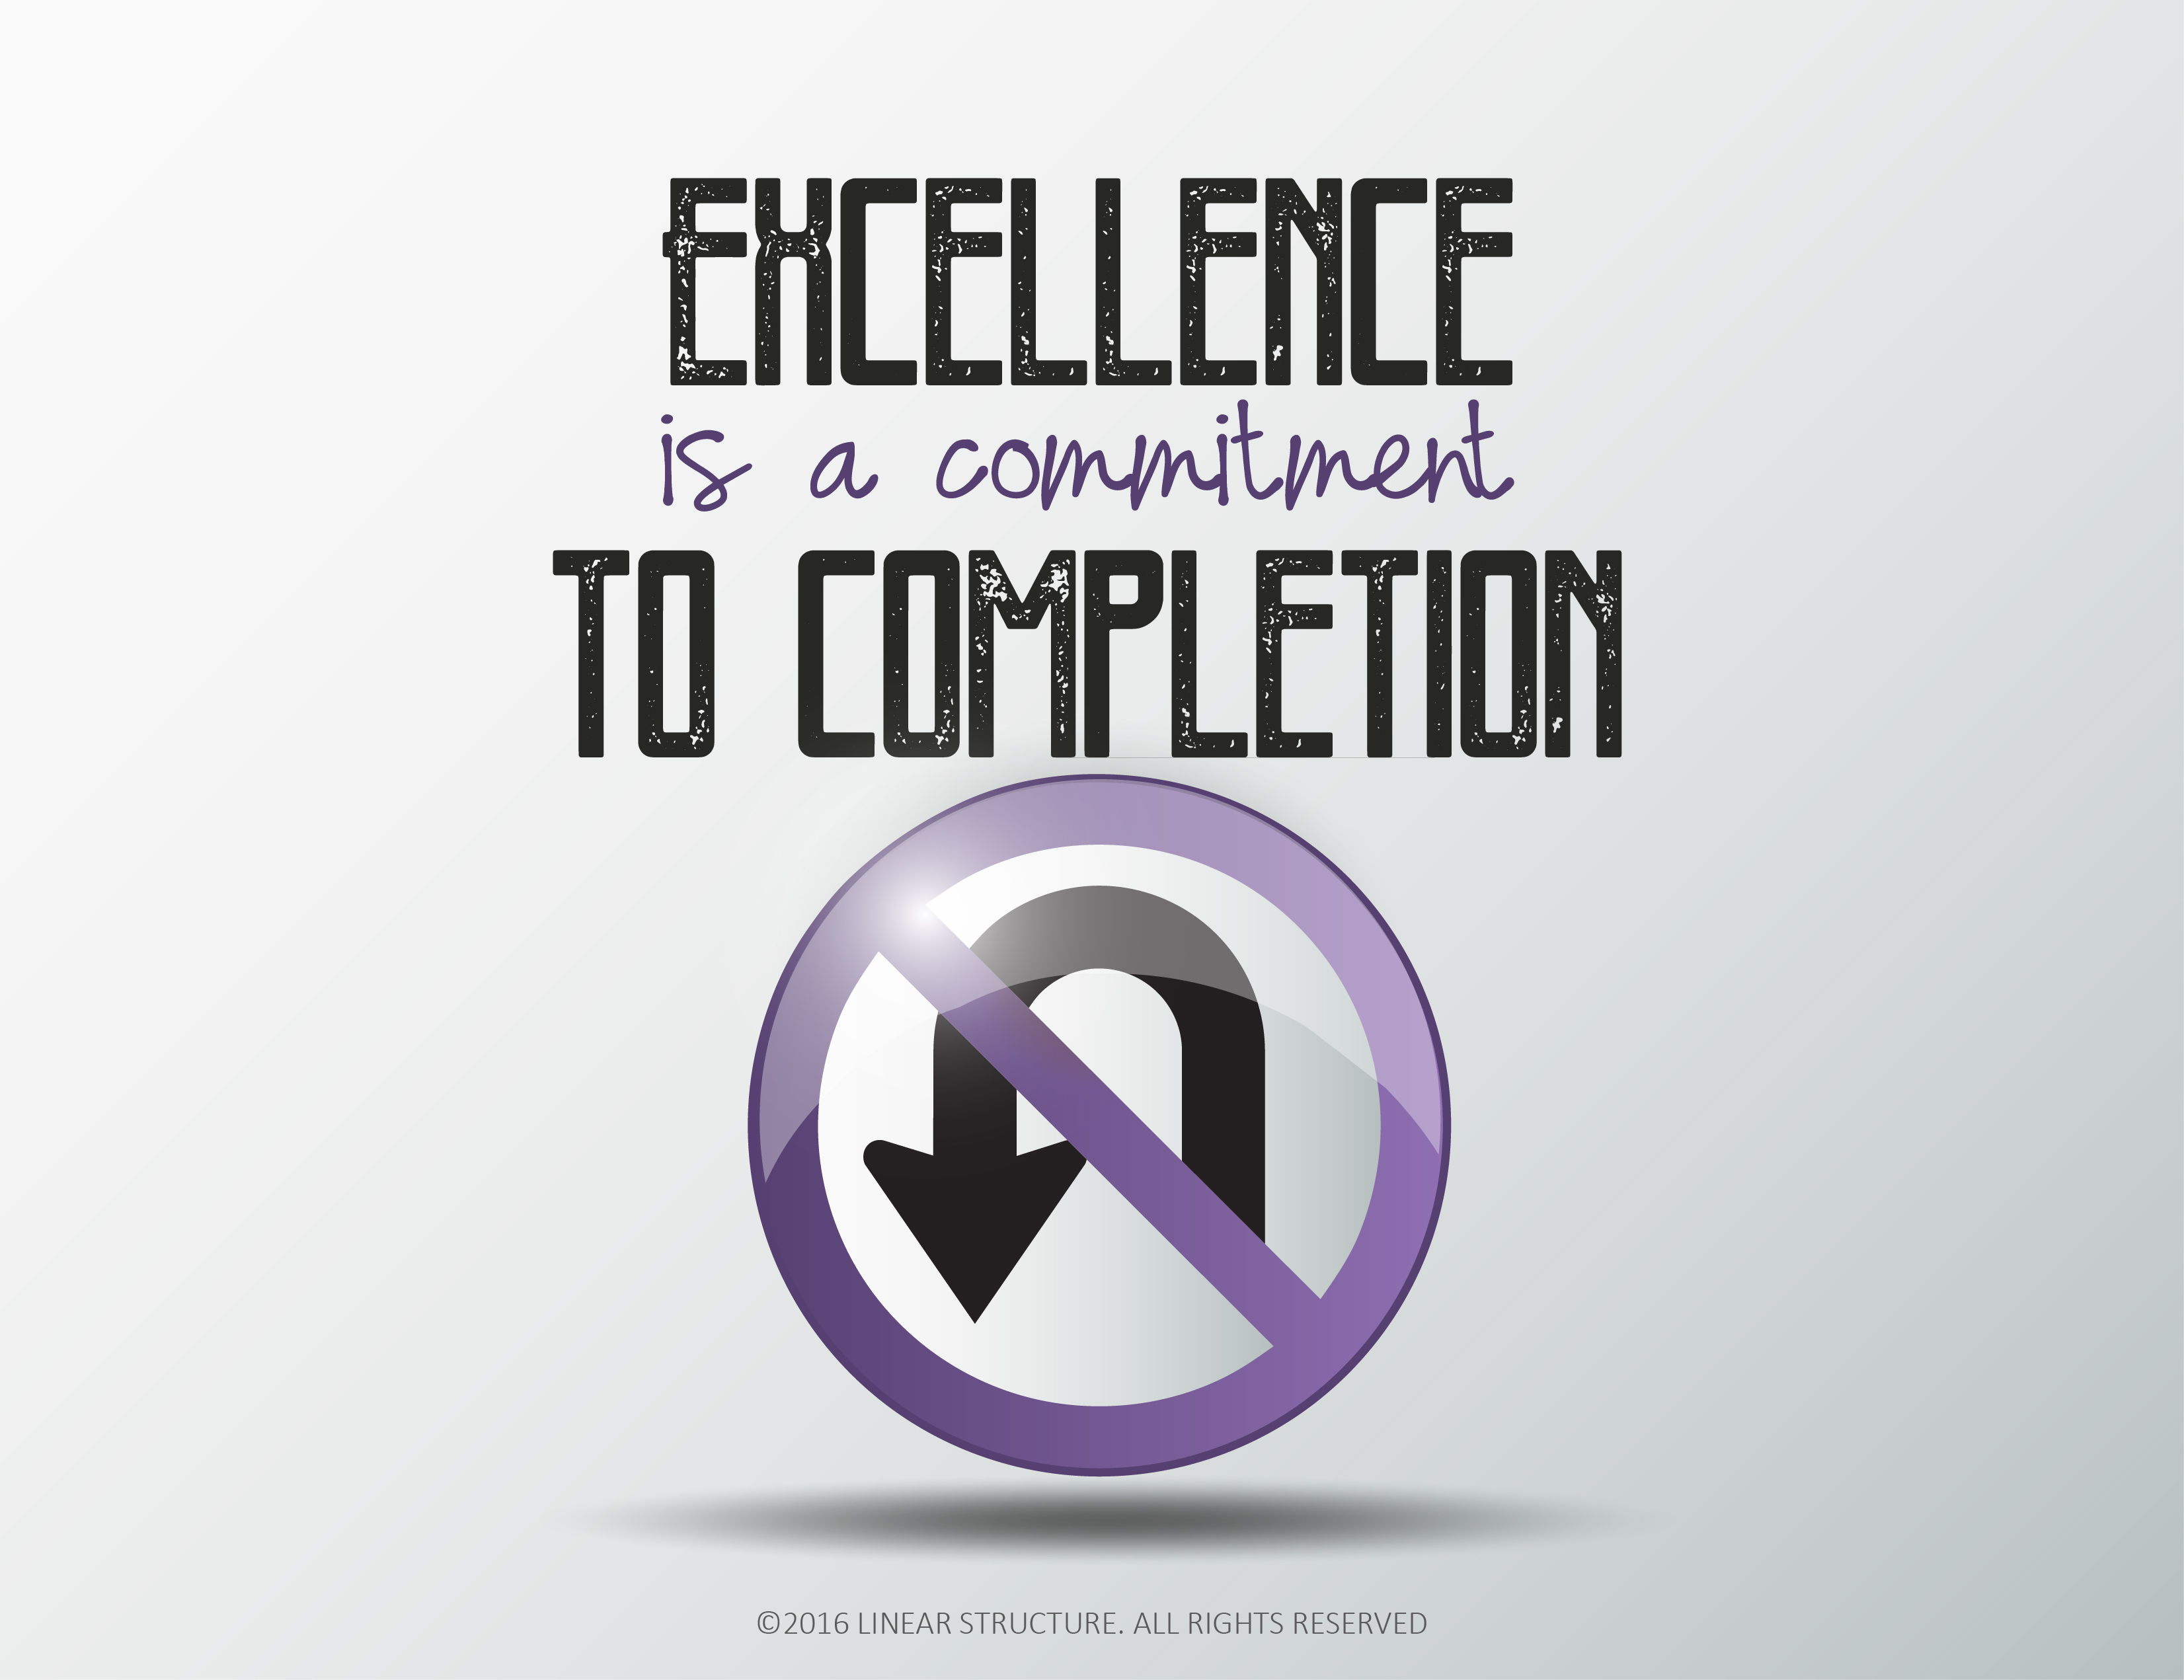 Excellence_is_a_commitment_to_completion